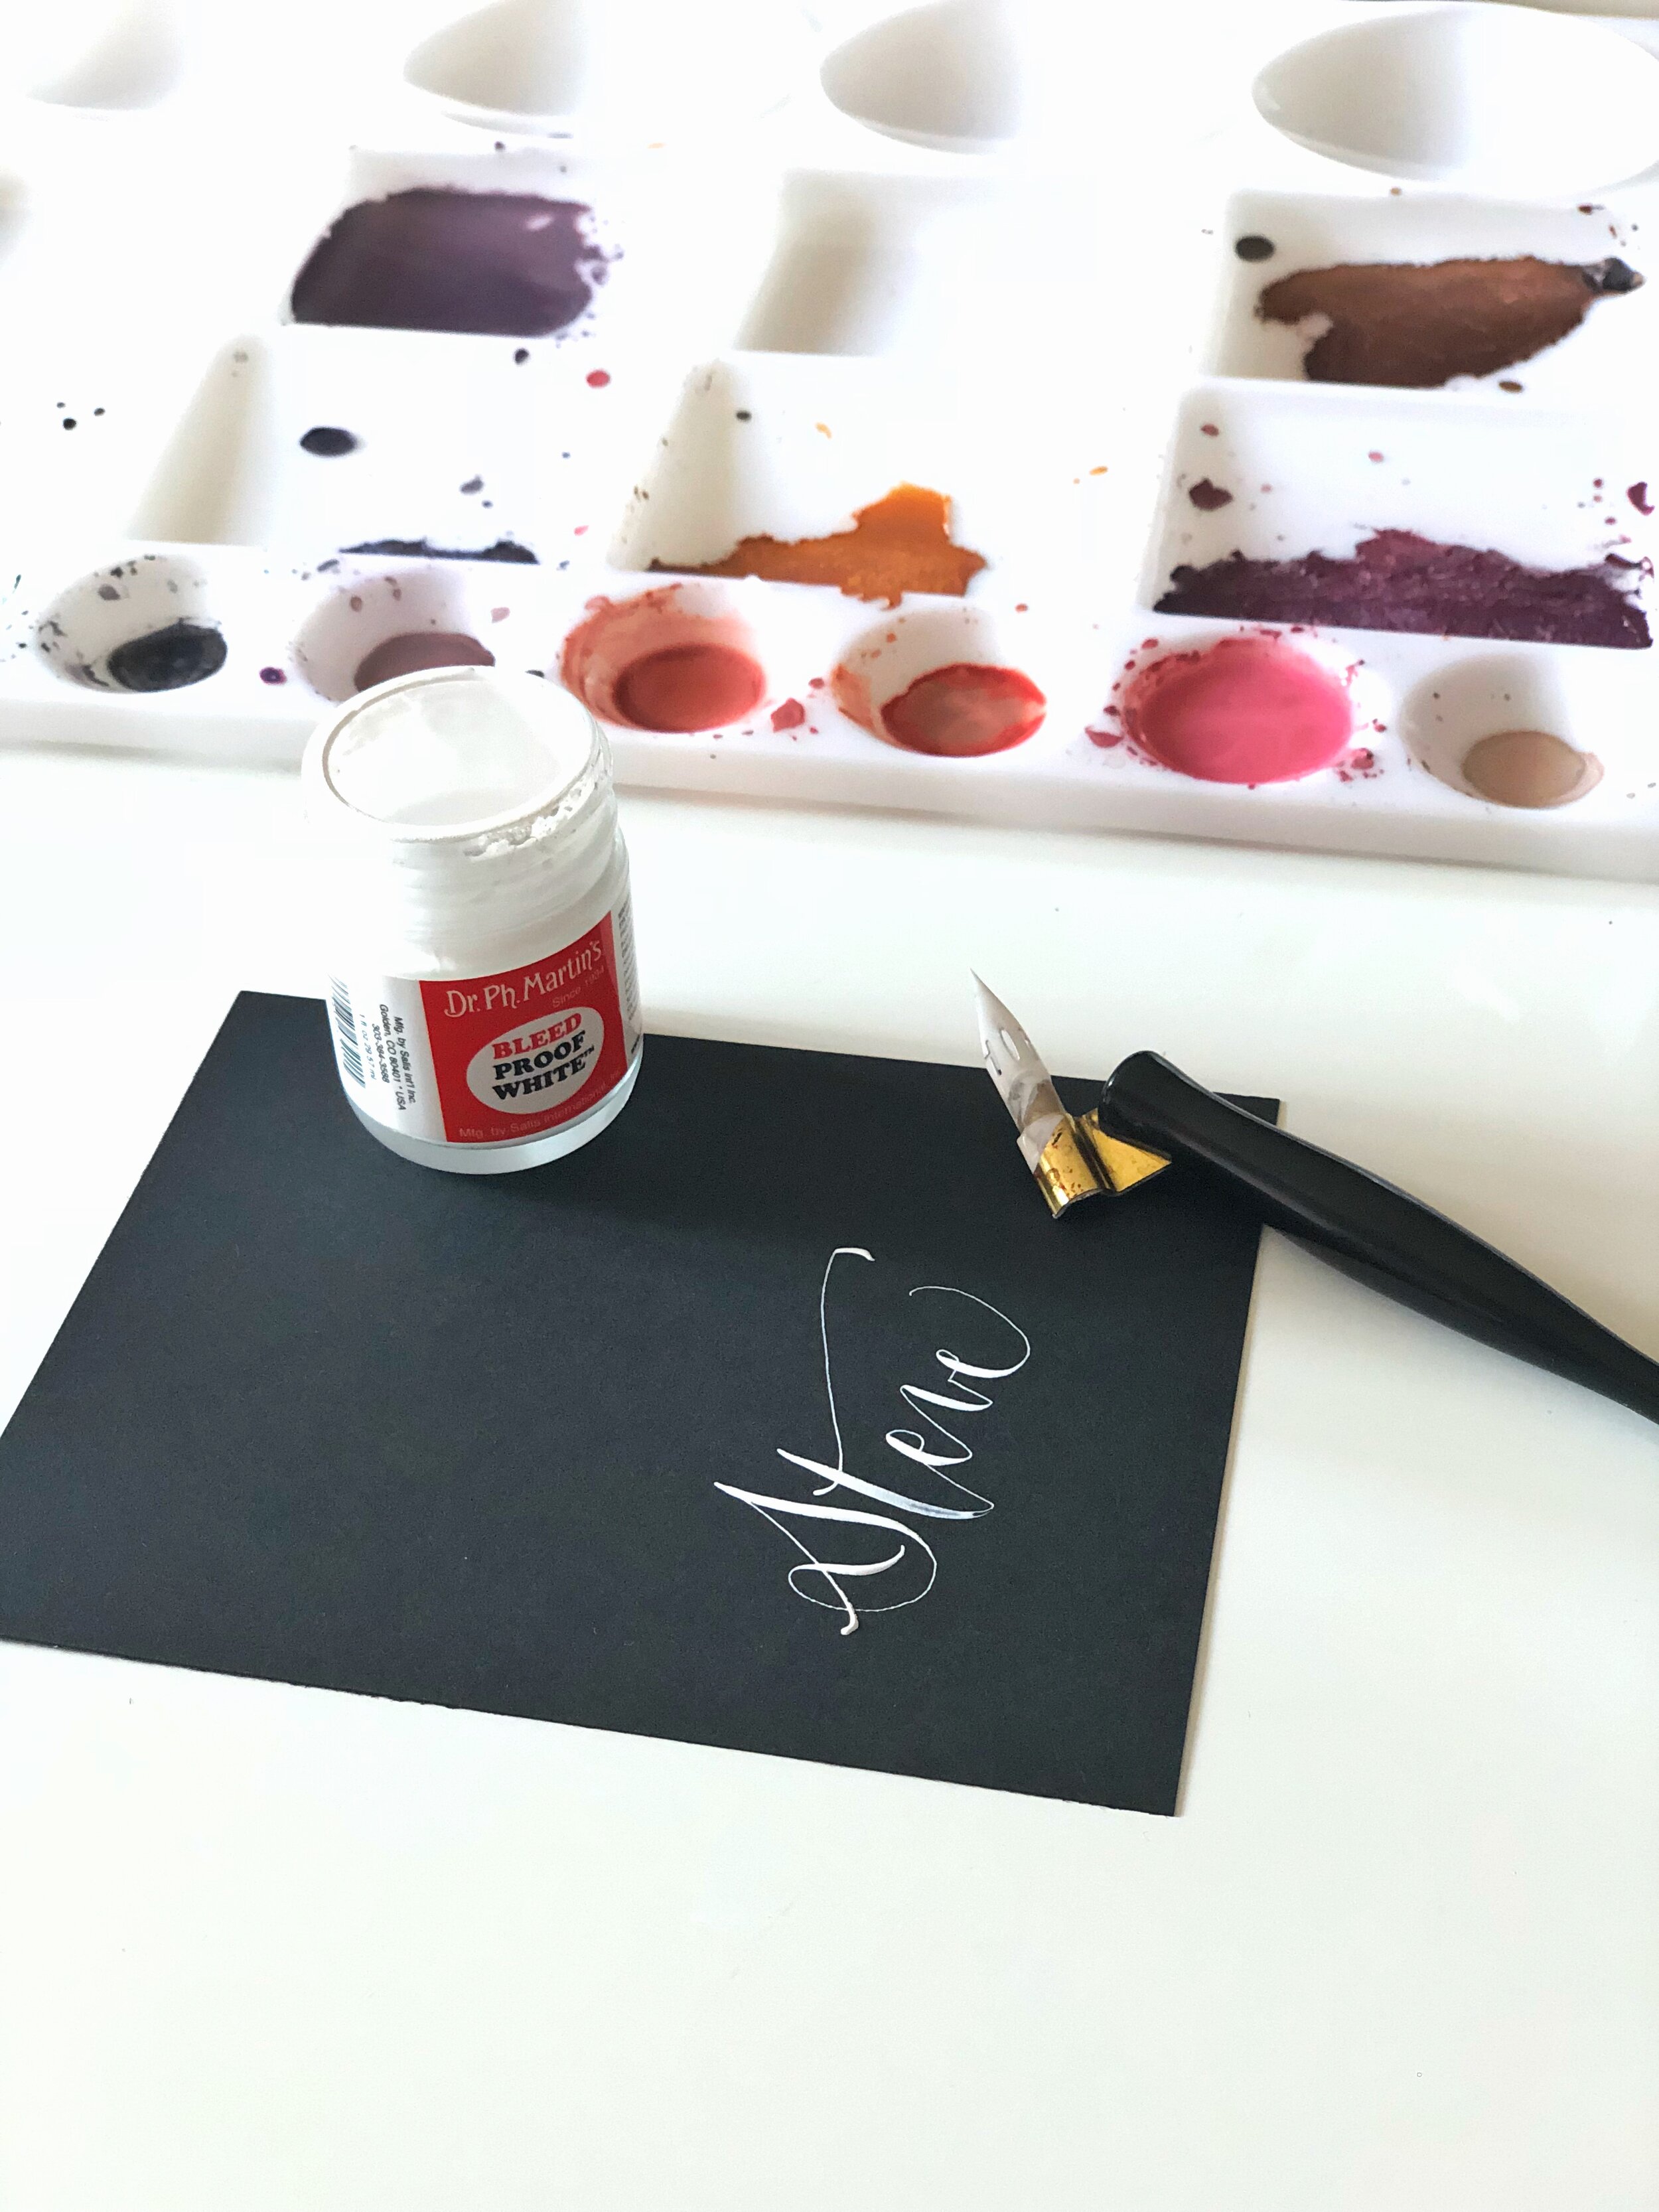 My Favourite Dr. Ph Martins Bleed Proof White Ink for Pointed Pen Modern  Calligraphy — Nicki Traikos, life i design